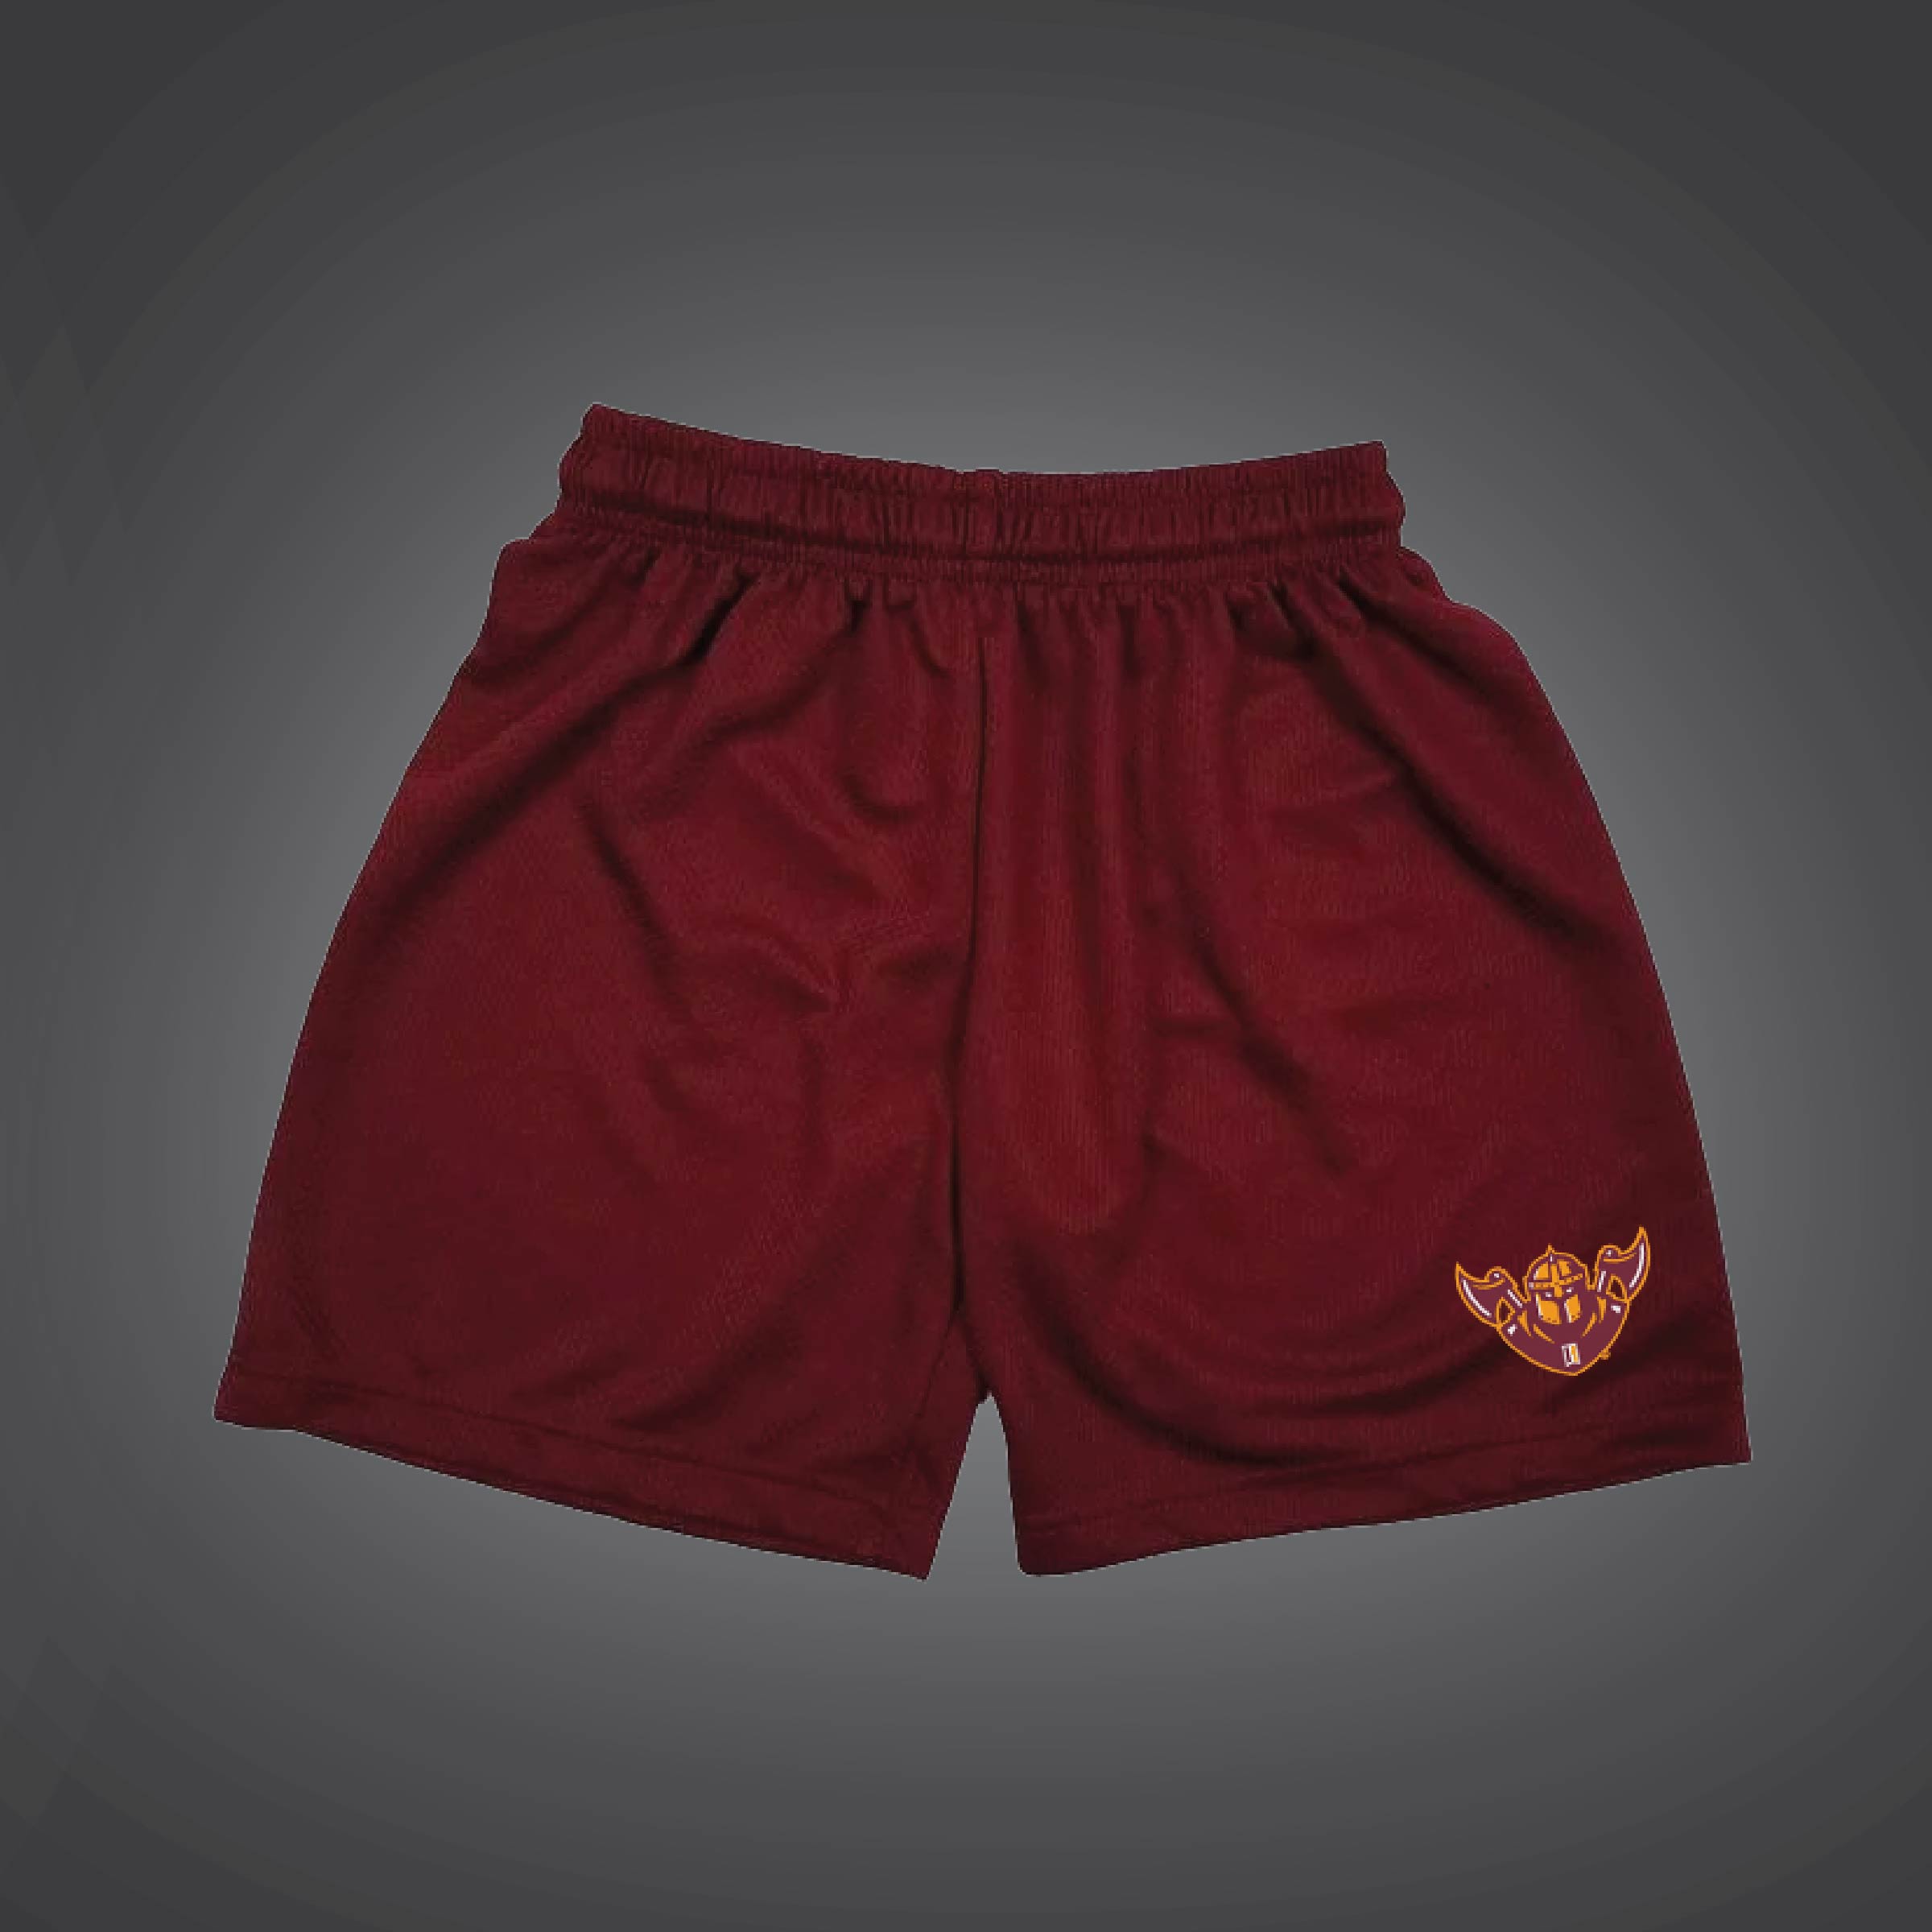 9" Inseam Maroon or Anthracite Nike Fly Shorts